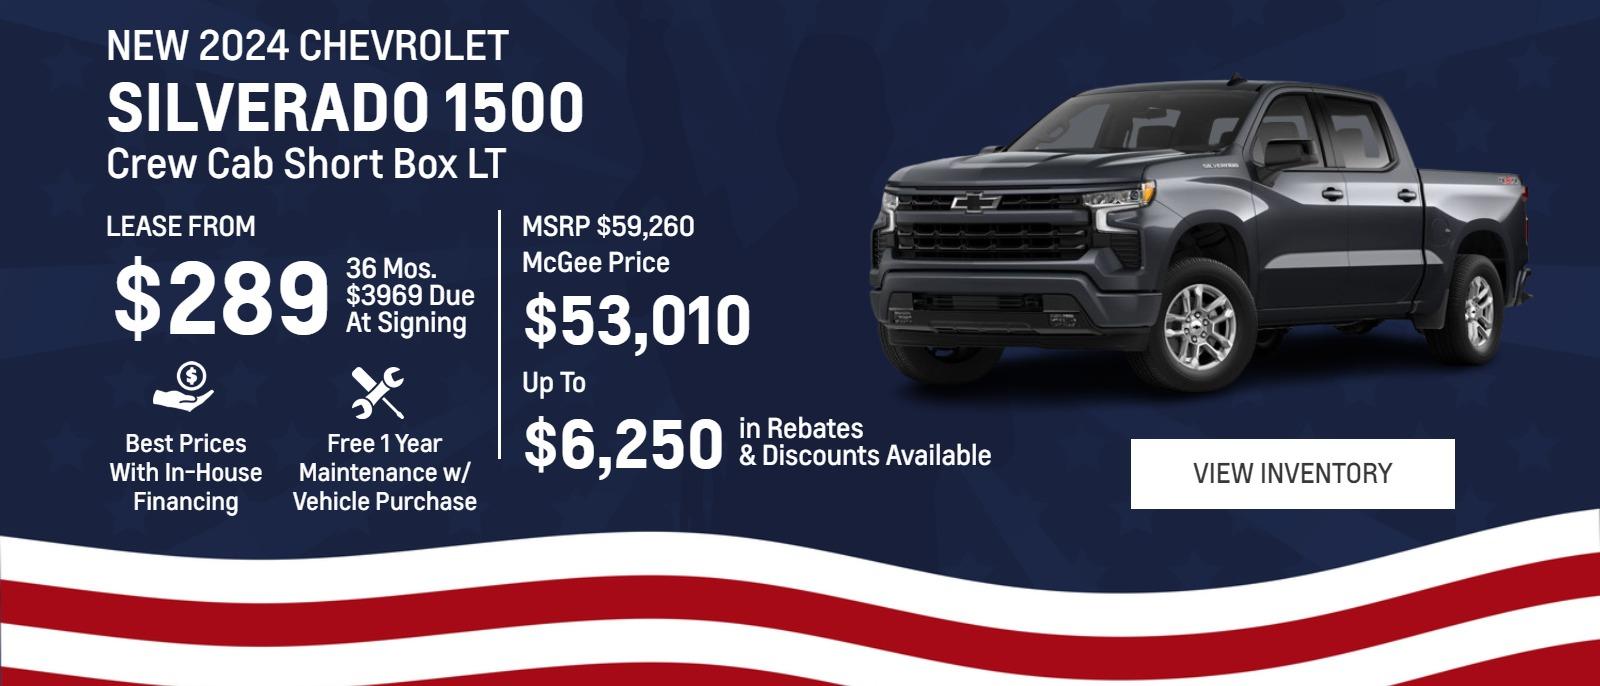 New 2024 Chevrolet
Silverado 1500 
Crew Cab Short Box LT

Lease From
$289 
36 mos.
$3969 due
at signing

MSRP $59,260
McGee Price
$53,010 

Up To
$6,250 
in Rebates
&Discounts Available

Best Prices With In-House Financing

Free 1 Year Maintenance
w/ Vehicle Purchase